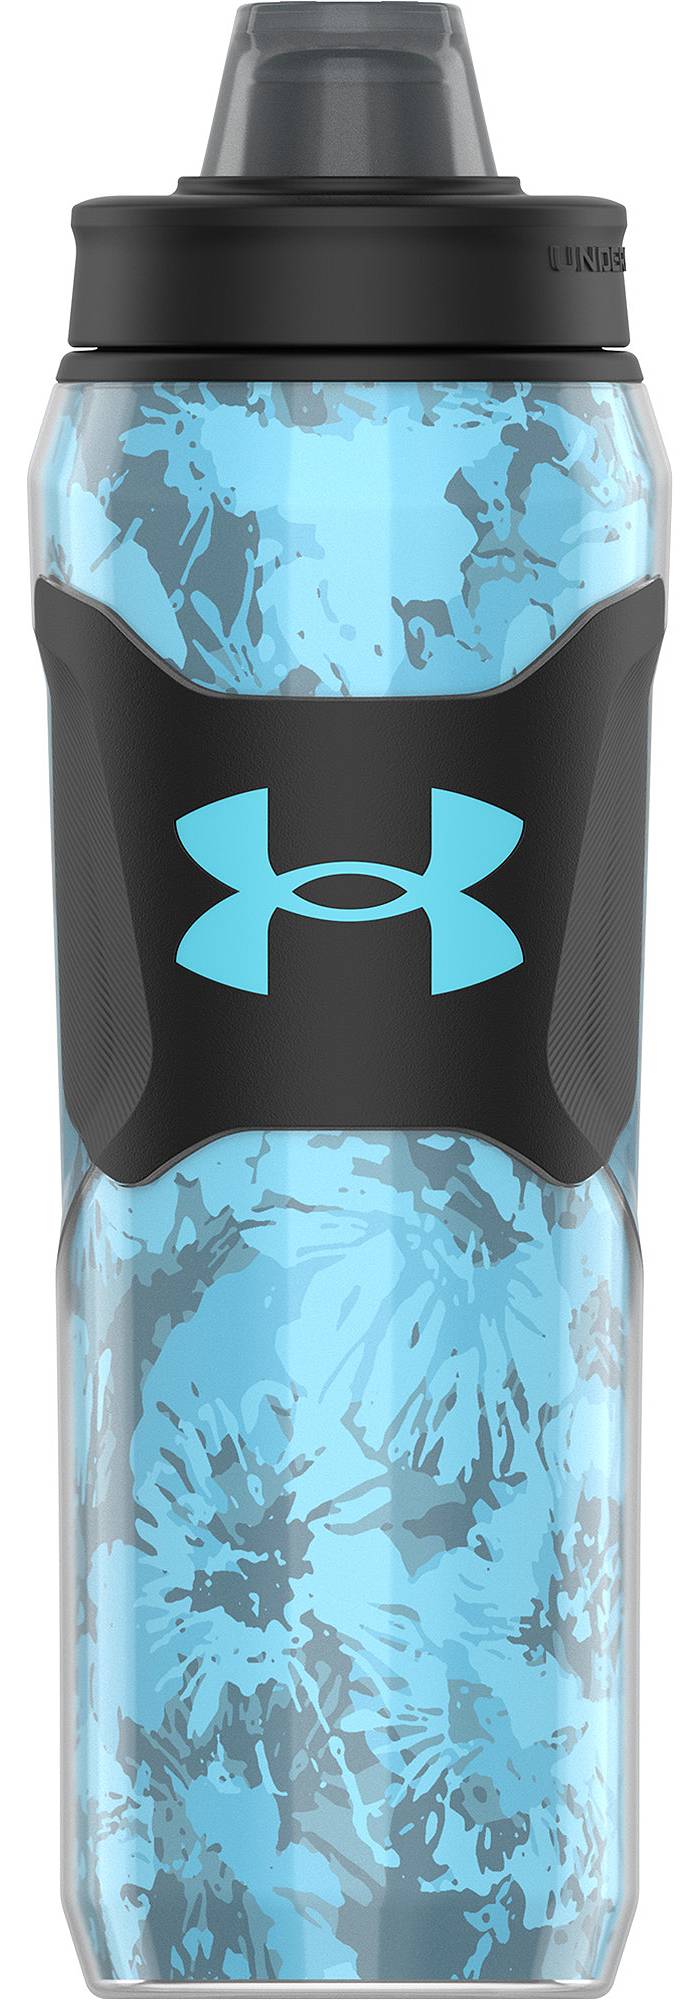 Under Armour Playmaker 32oz Water Jug